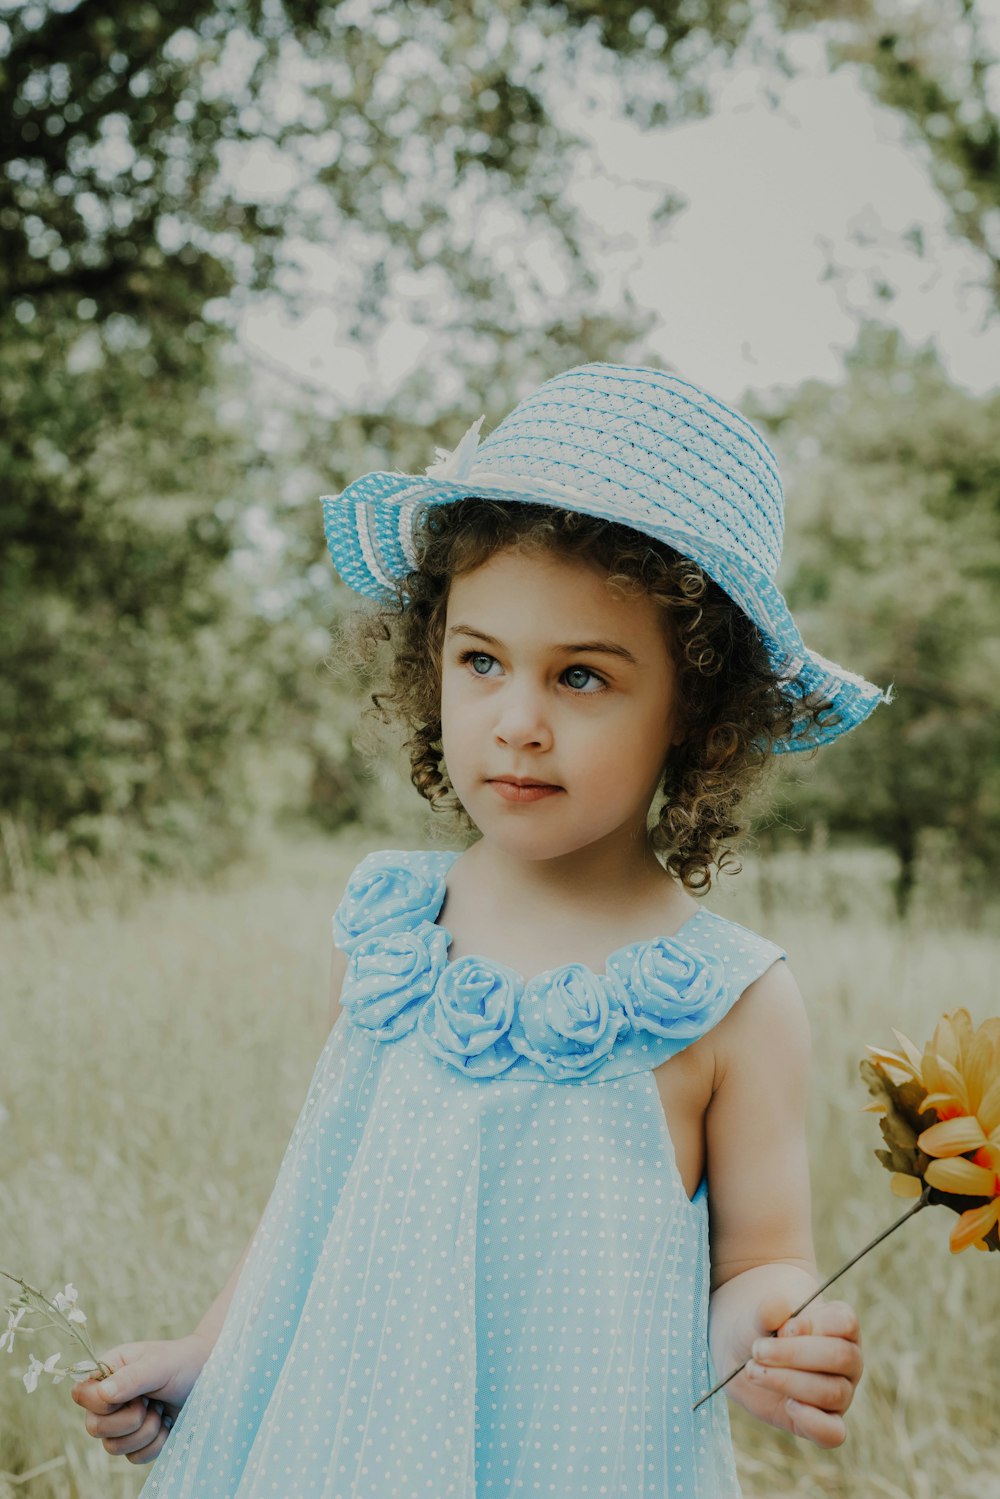 girl in blue dress and white hat holding yellow flower